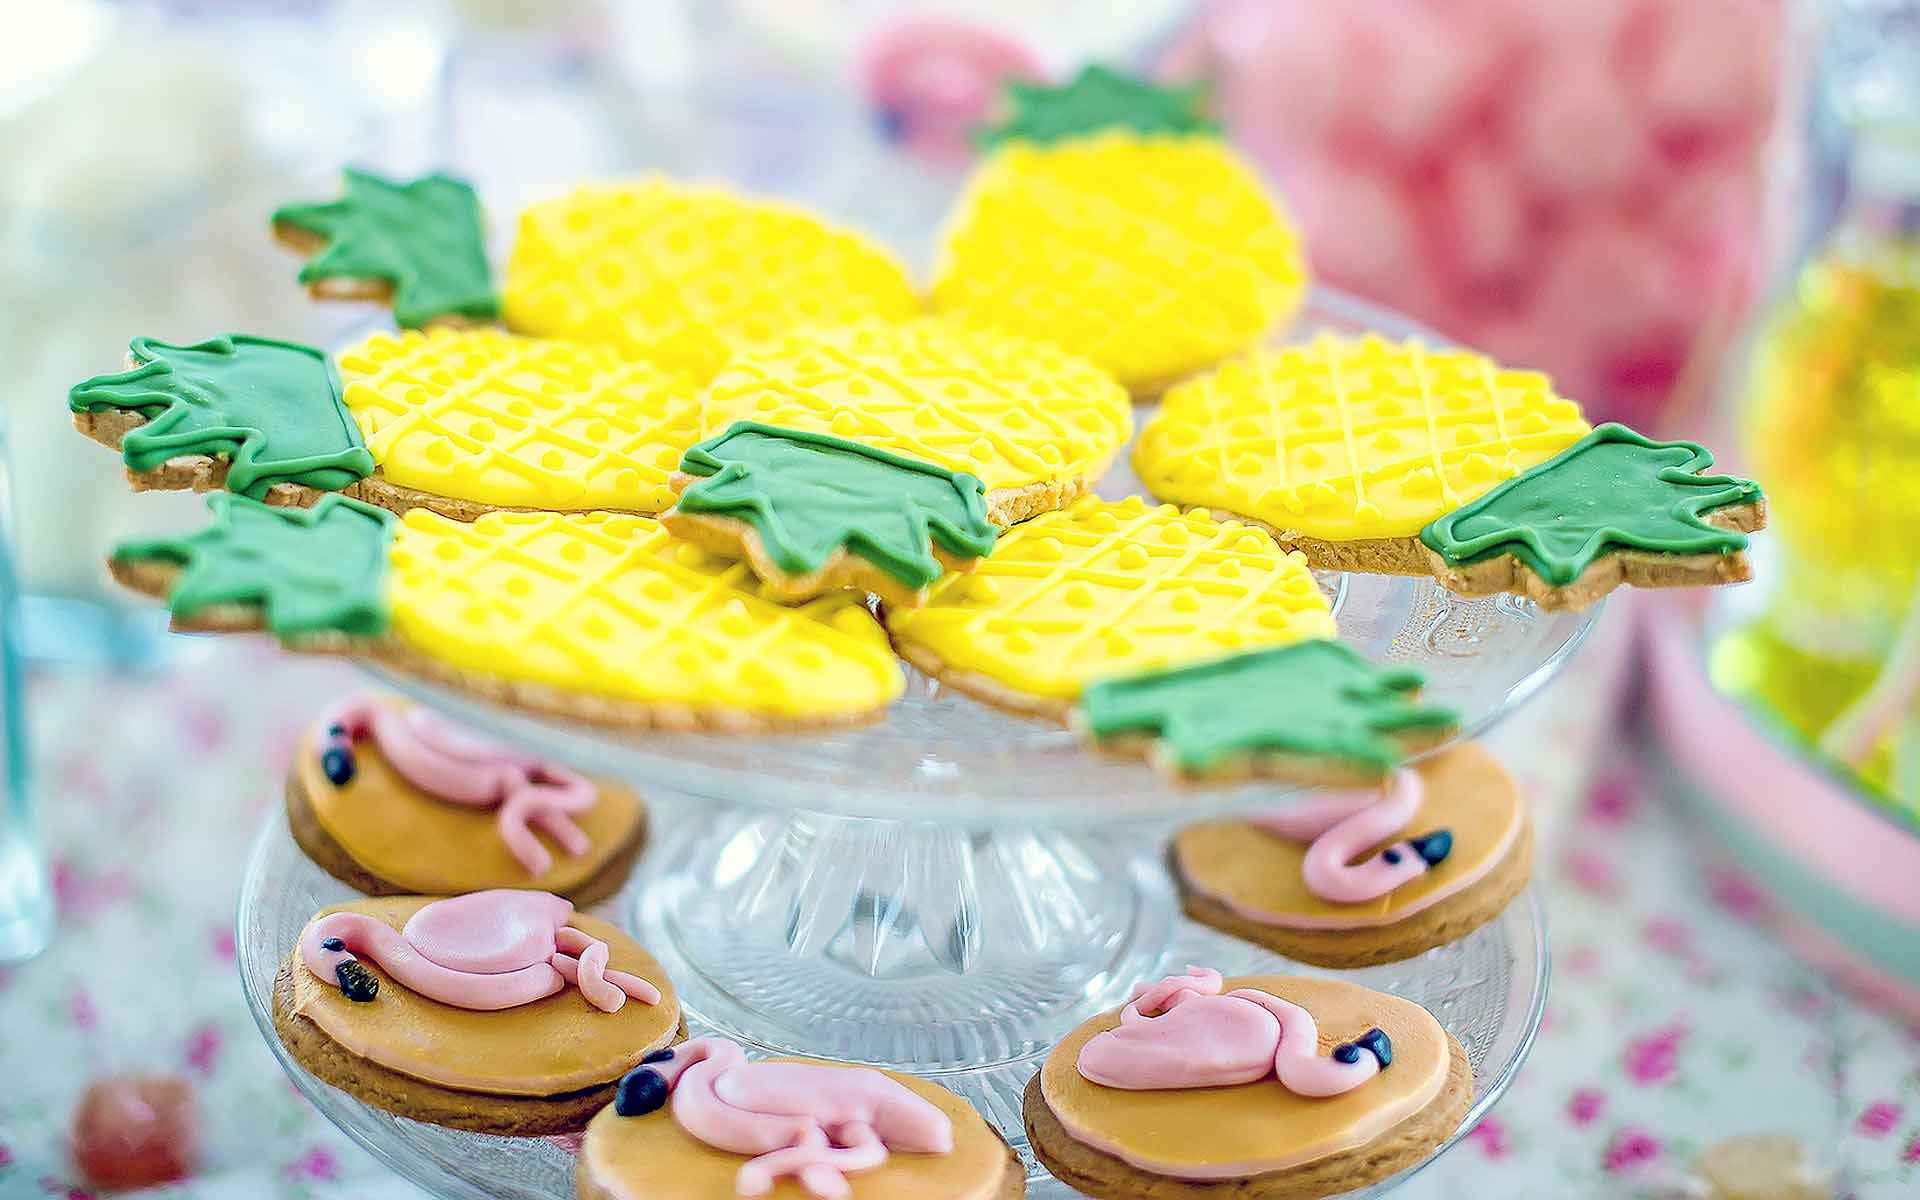 Flamingo-Biscuits-For-Tropical-Themed-Bridal-Shower-Or-Bachelorette-Party